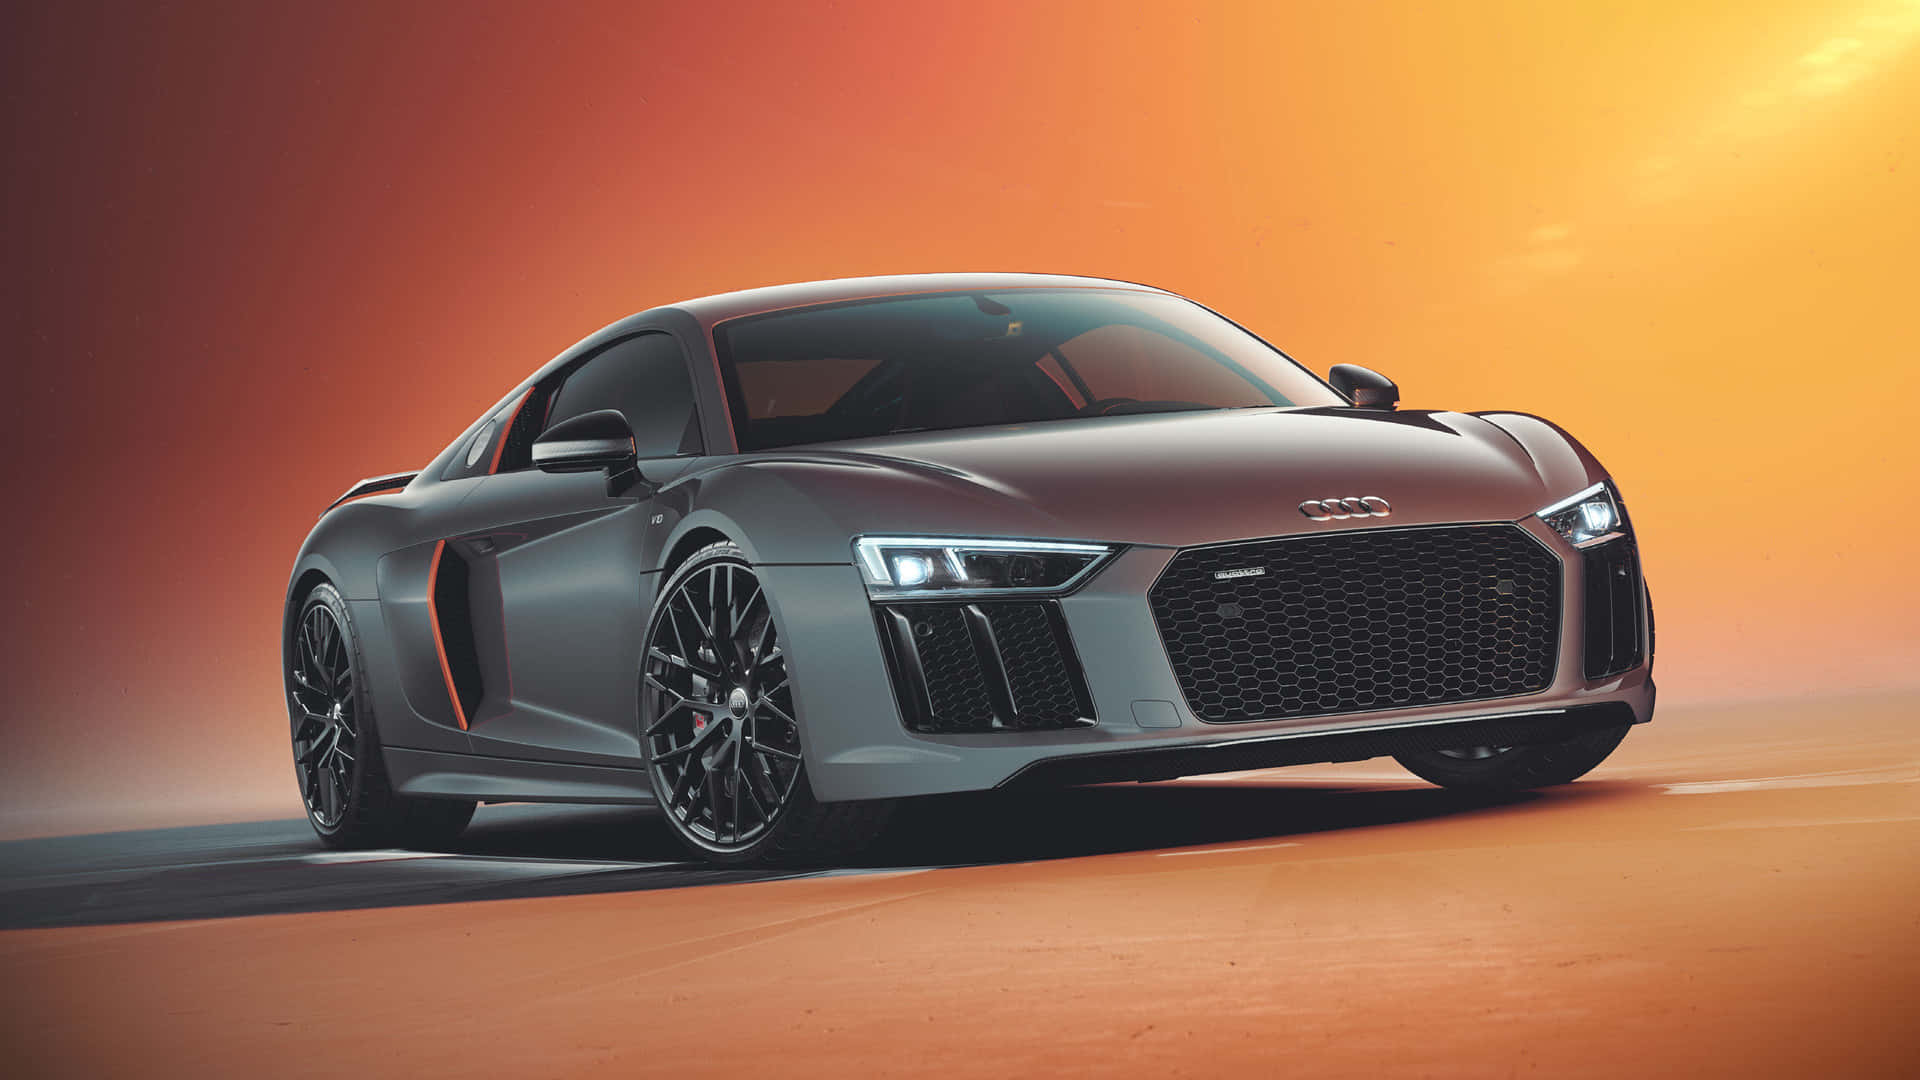 Sleek Audi sports car in motion on a scenic road